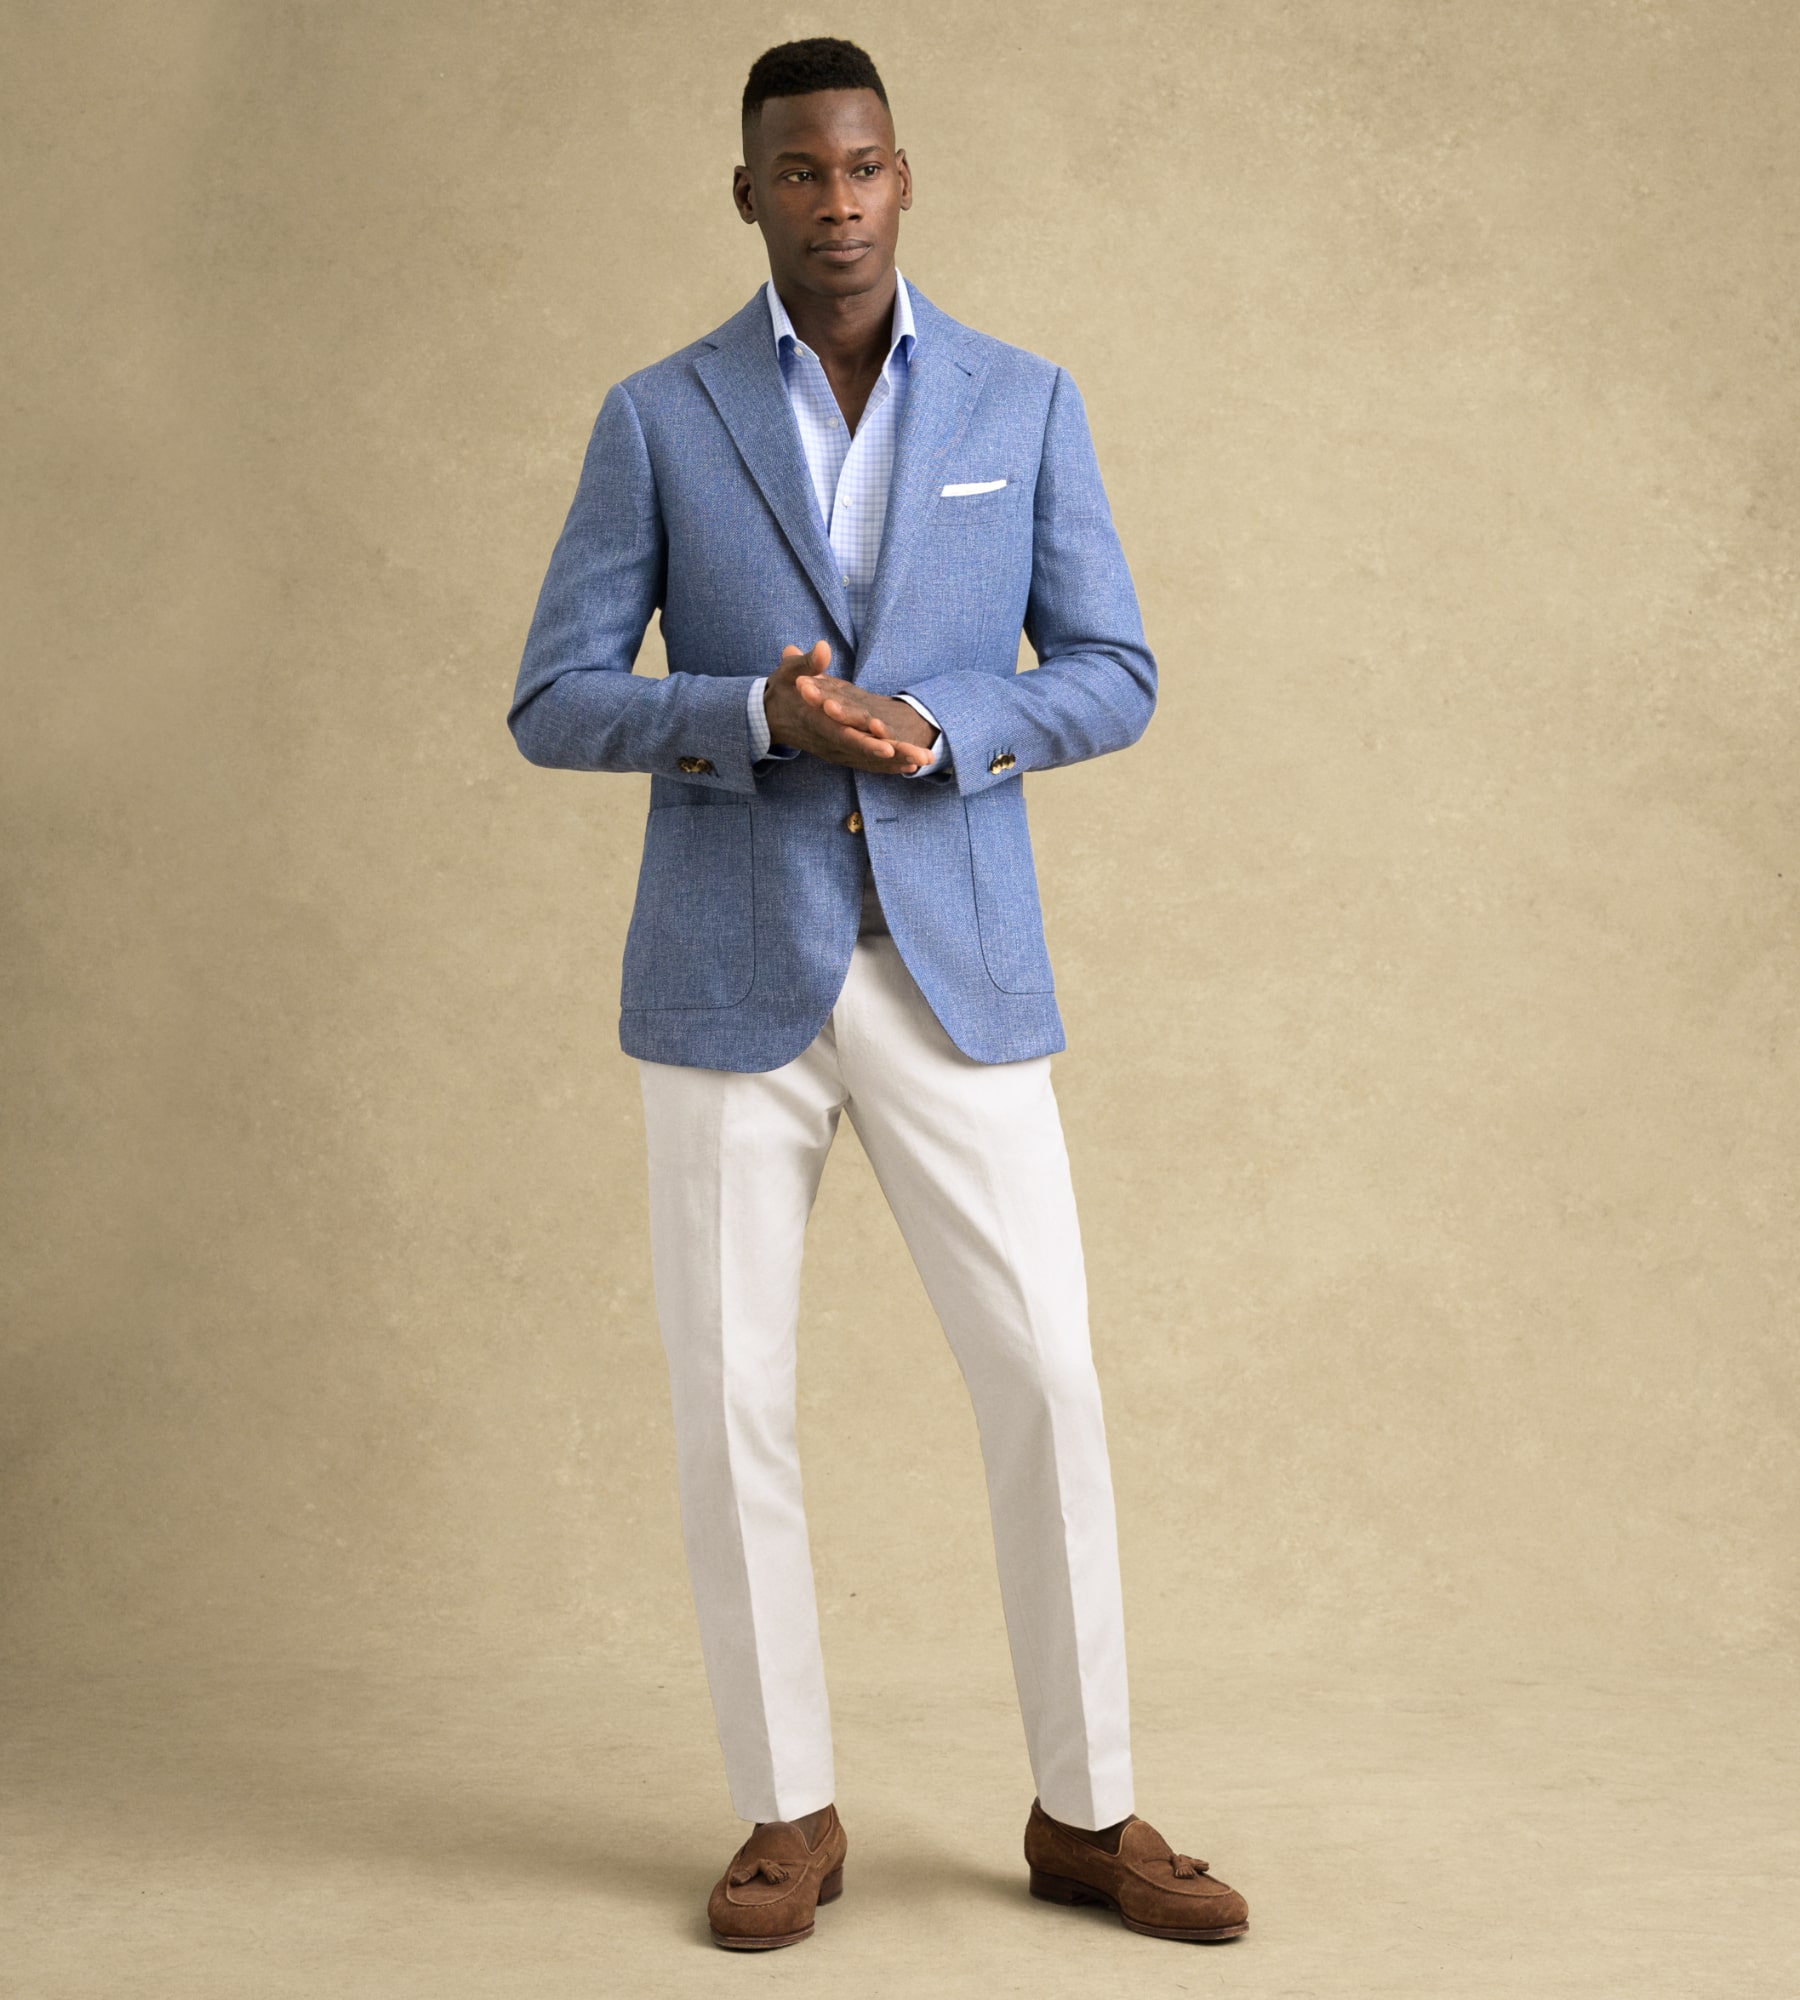 The Definitive Guide to Wedding Guest Dress Codes for Men - Proper Cloth